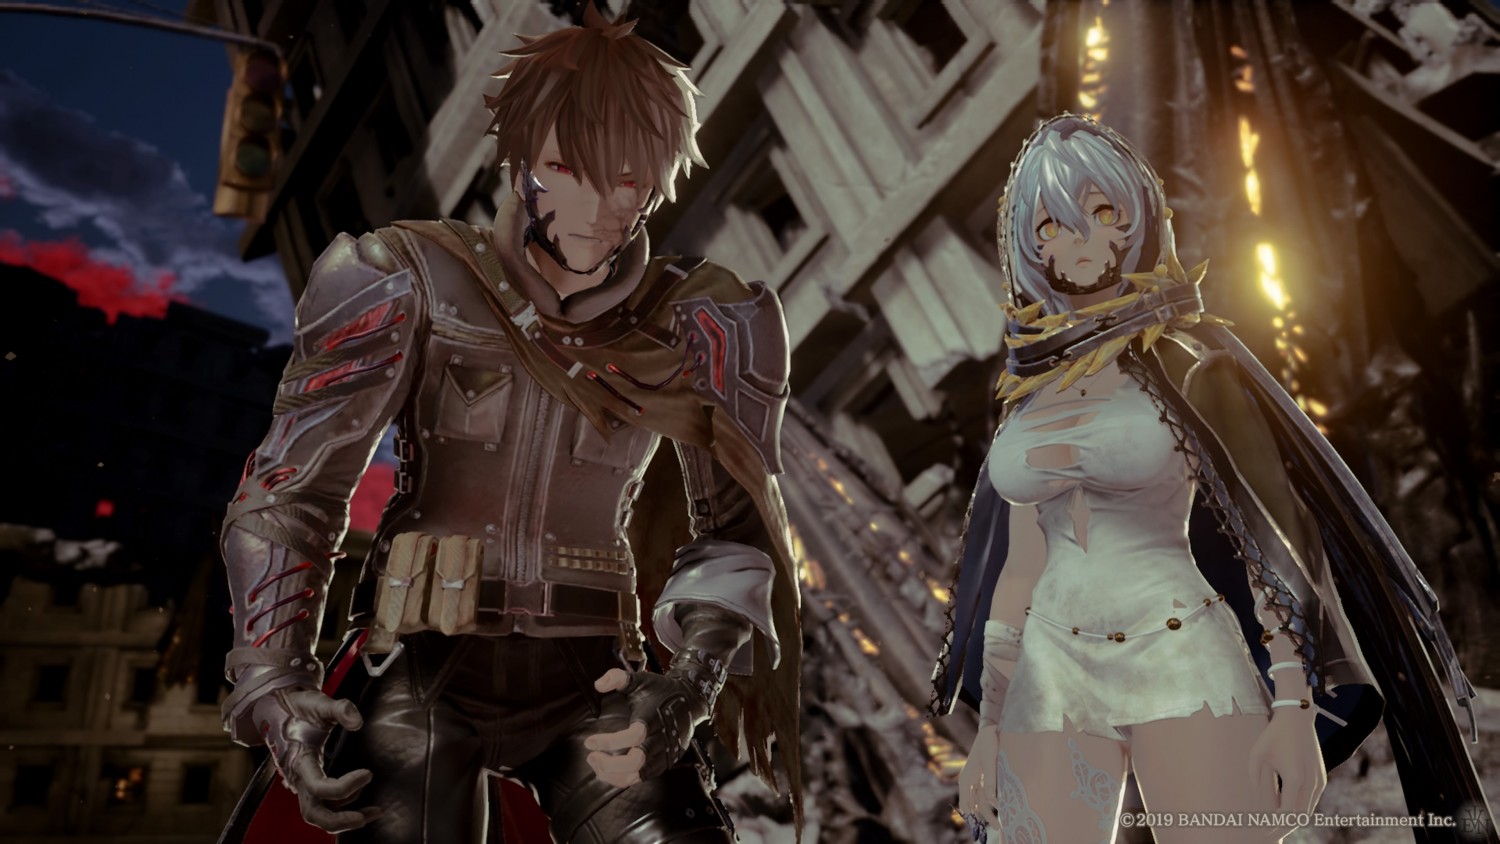 Code Vein Hands On Preview - Anime Dark Souls? We'll See About That